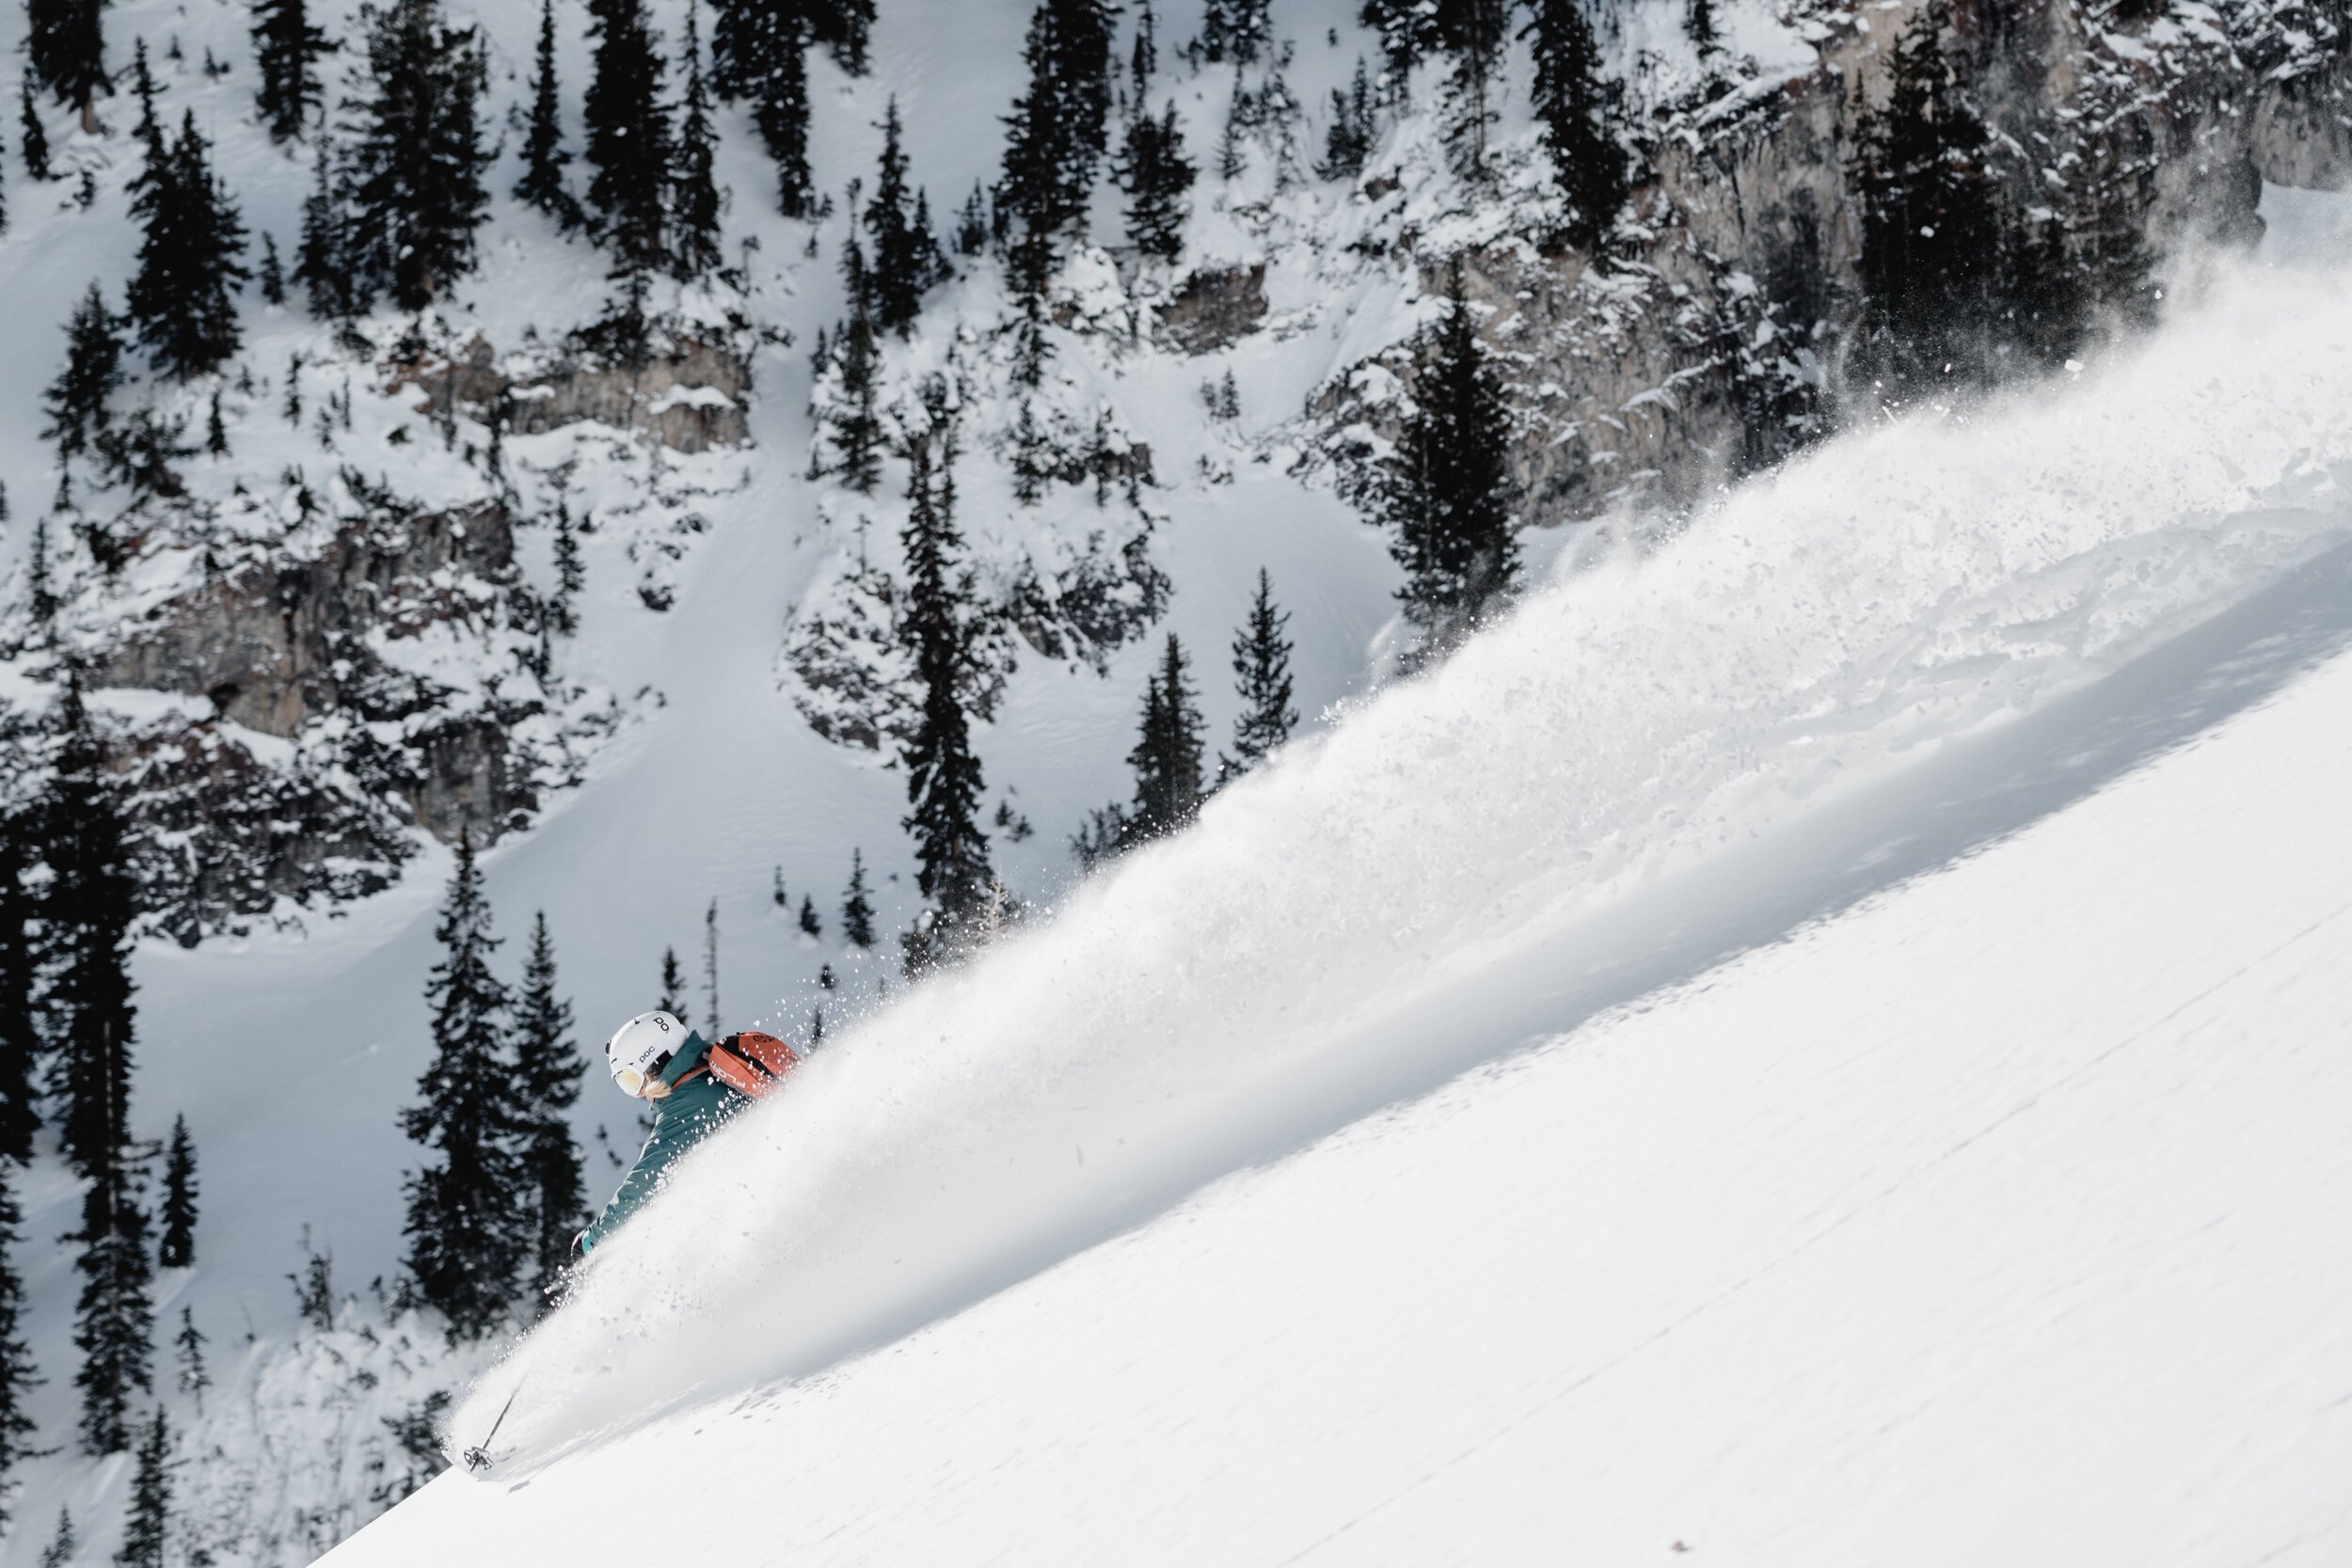   Backcountry Gear &amp; Apparel Winter ’19     Pursuits : Helicopter Skiing, Backcountry Skiing, and Resort Skiing   Location : Little Cottonwood Canyon, UT    Producer : Tyler Arrivillaga   Photographers : Re Wikstrom &amp; Ben Christensen 